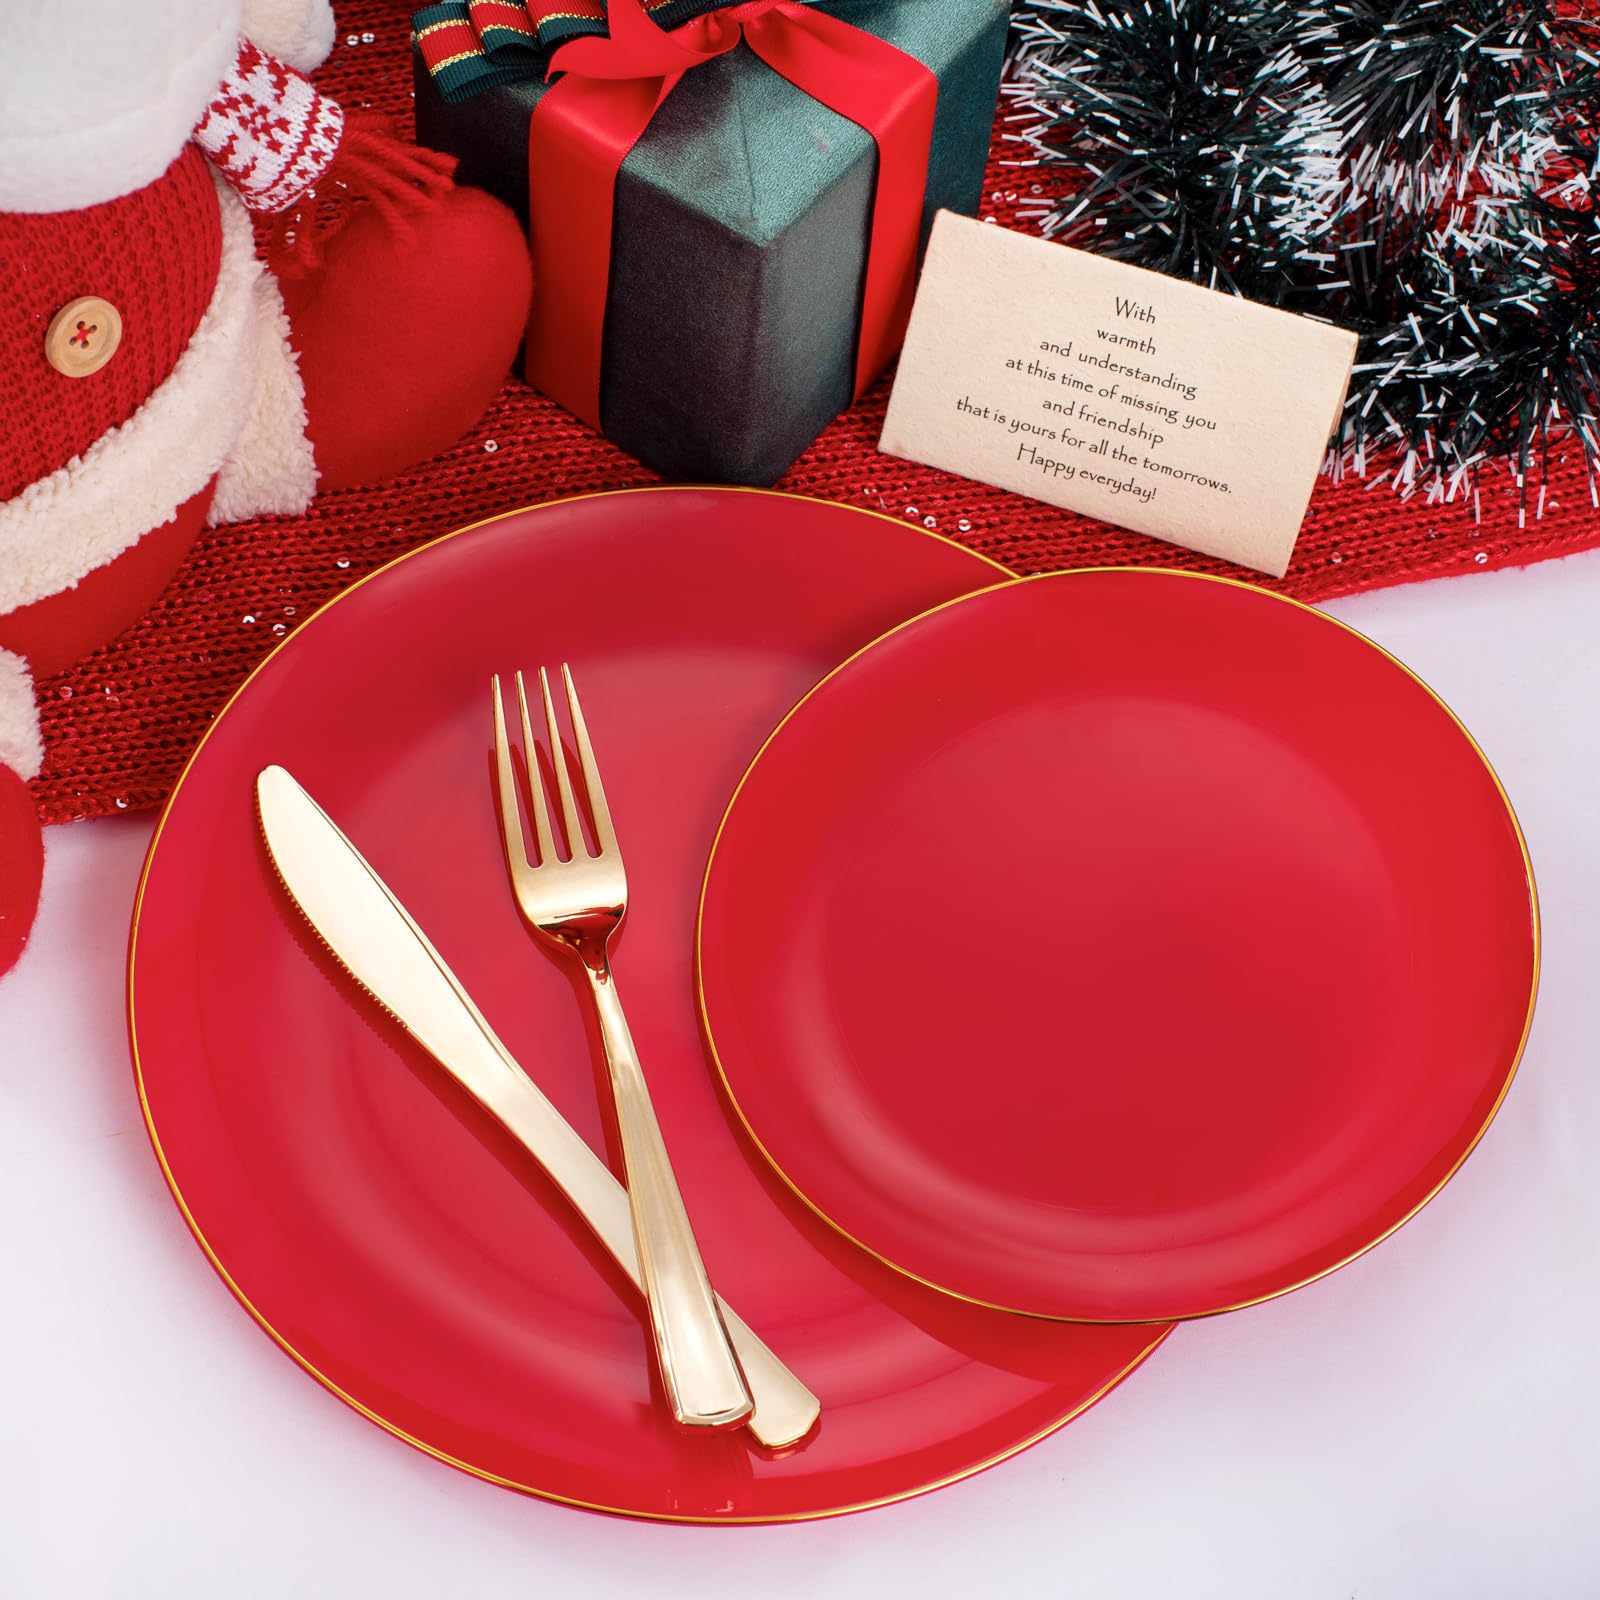 PULOTE 100PCS Red Plastic Plates - Heavy Duty Red Plates Disposable - Red Disposable Plates Include 50PCS Red Dinner Plates 10.25inch,50PCS Red Dessert Plates 7.5inch for Party&Valentine